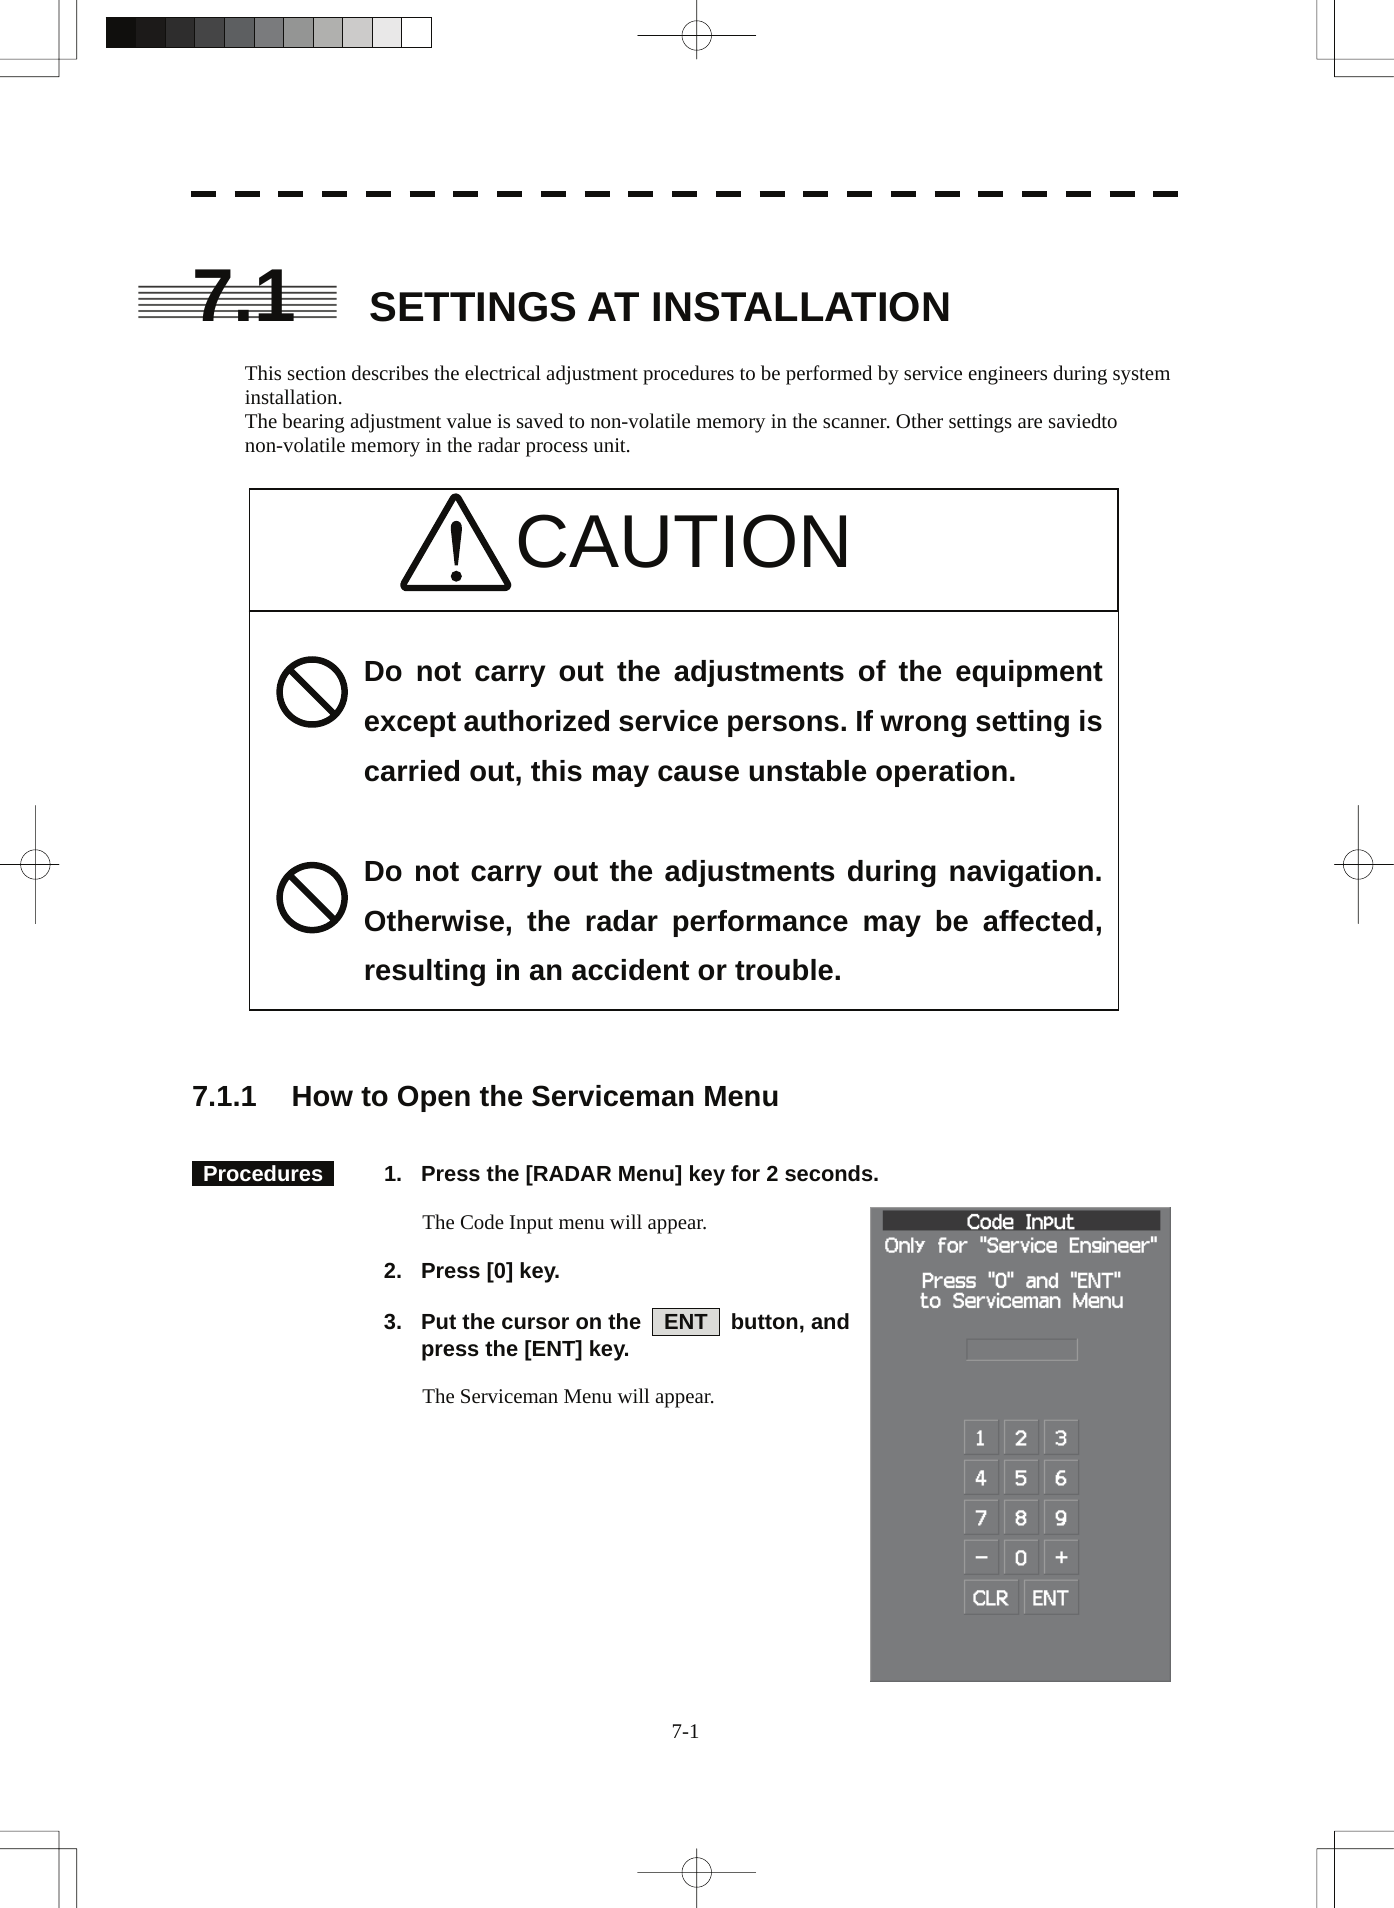   7.1 SETTINGS AT INSTALLATION  This section describes the electrical adjustment procedures to be performed by service engineers during system installation. The bearing adjustment value is saved to non-volatile memory in the scanner. Other settings are saviedto non-volatile memory in the radar process unit.   CAUTION                        Do not carry out the adjustments of the equipment except authorized service persons. If wrong setting is carried out, this may cause unstable operation.  Do not carry out the adjustments during navigation. Otherwise, the radar performance may be affected, resulting in an accident or trouble.   7.1.1  How to Open the Serviceman Menu    Procedures    1.  Press the [RADAR Menu] key for 2 seconds.  The Code Input menu will appear.    2.  Press [0] key.    3.  Put the cursor on the    ENT    button, and press the [ENT] key.  The Serviceman Menu will appear. 7-1 